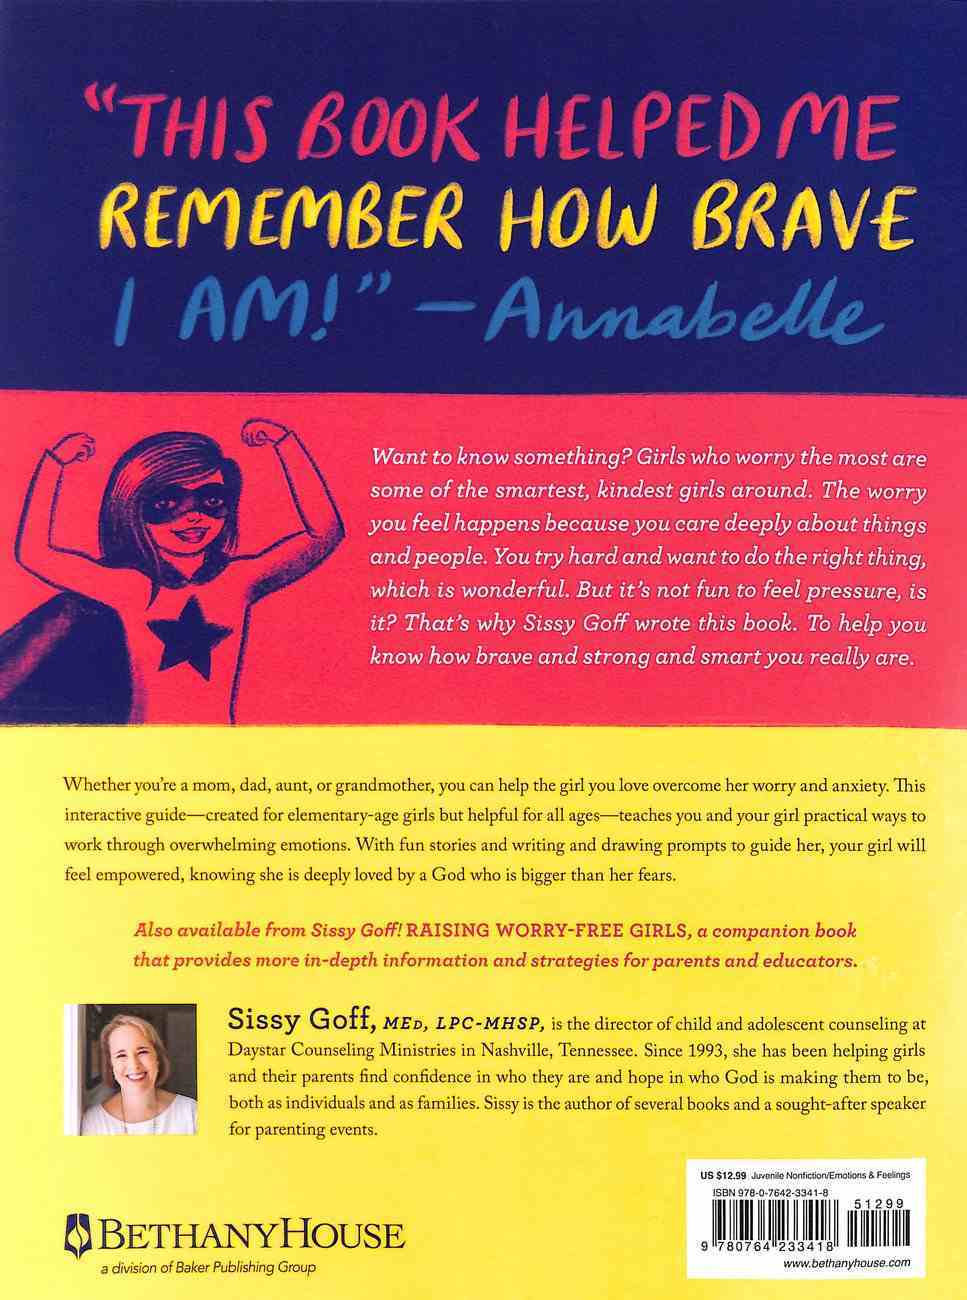 Braver, Stronger, Smarter: A Girl's Guide to Overcoming Worry and Anxiety Paperback